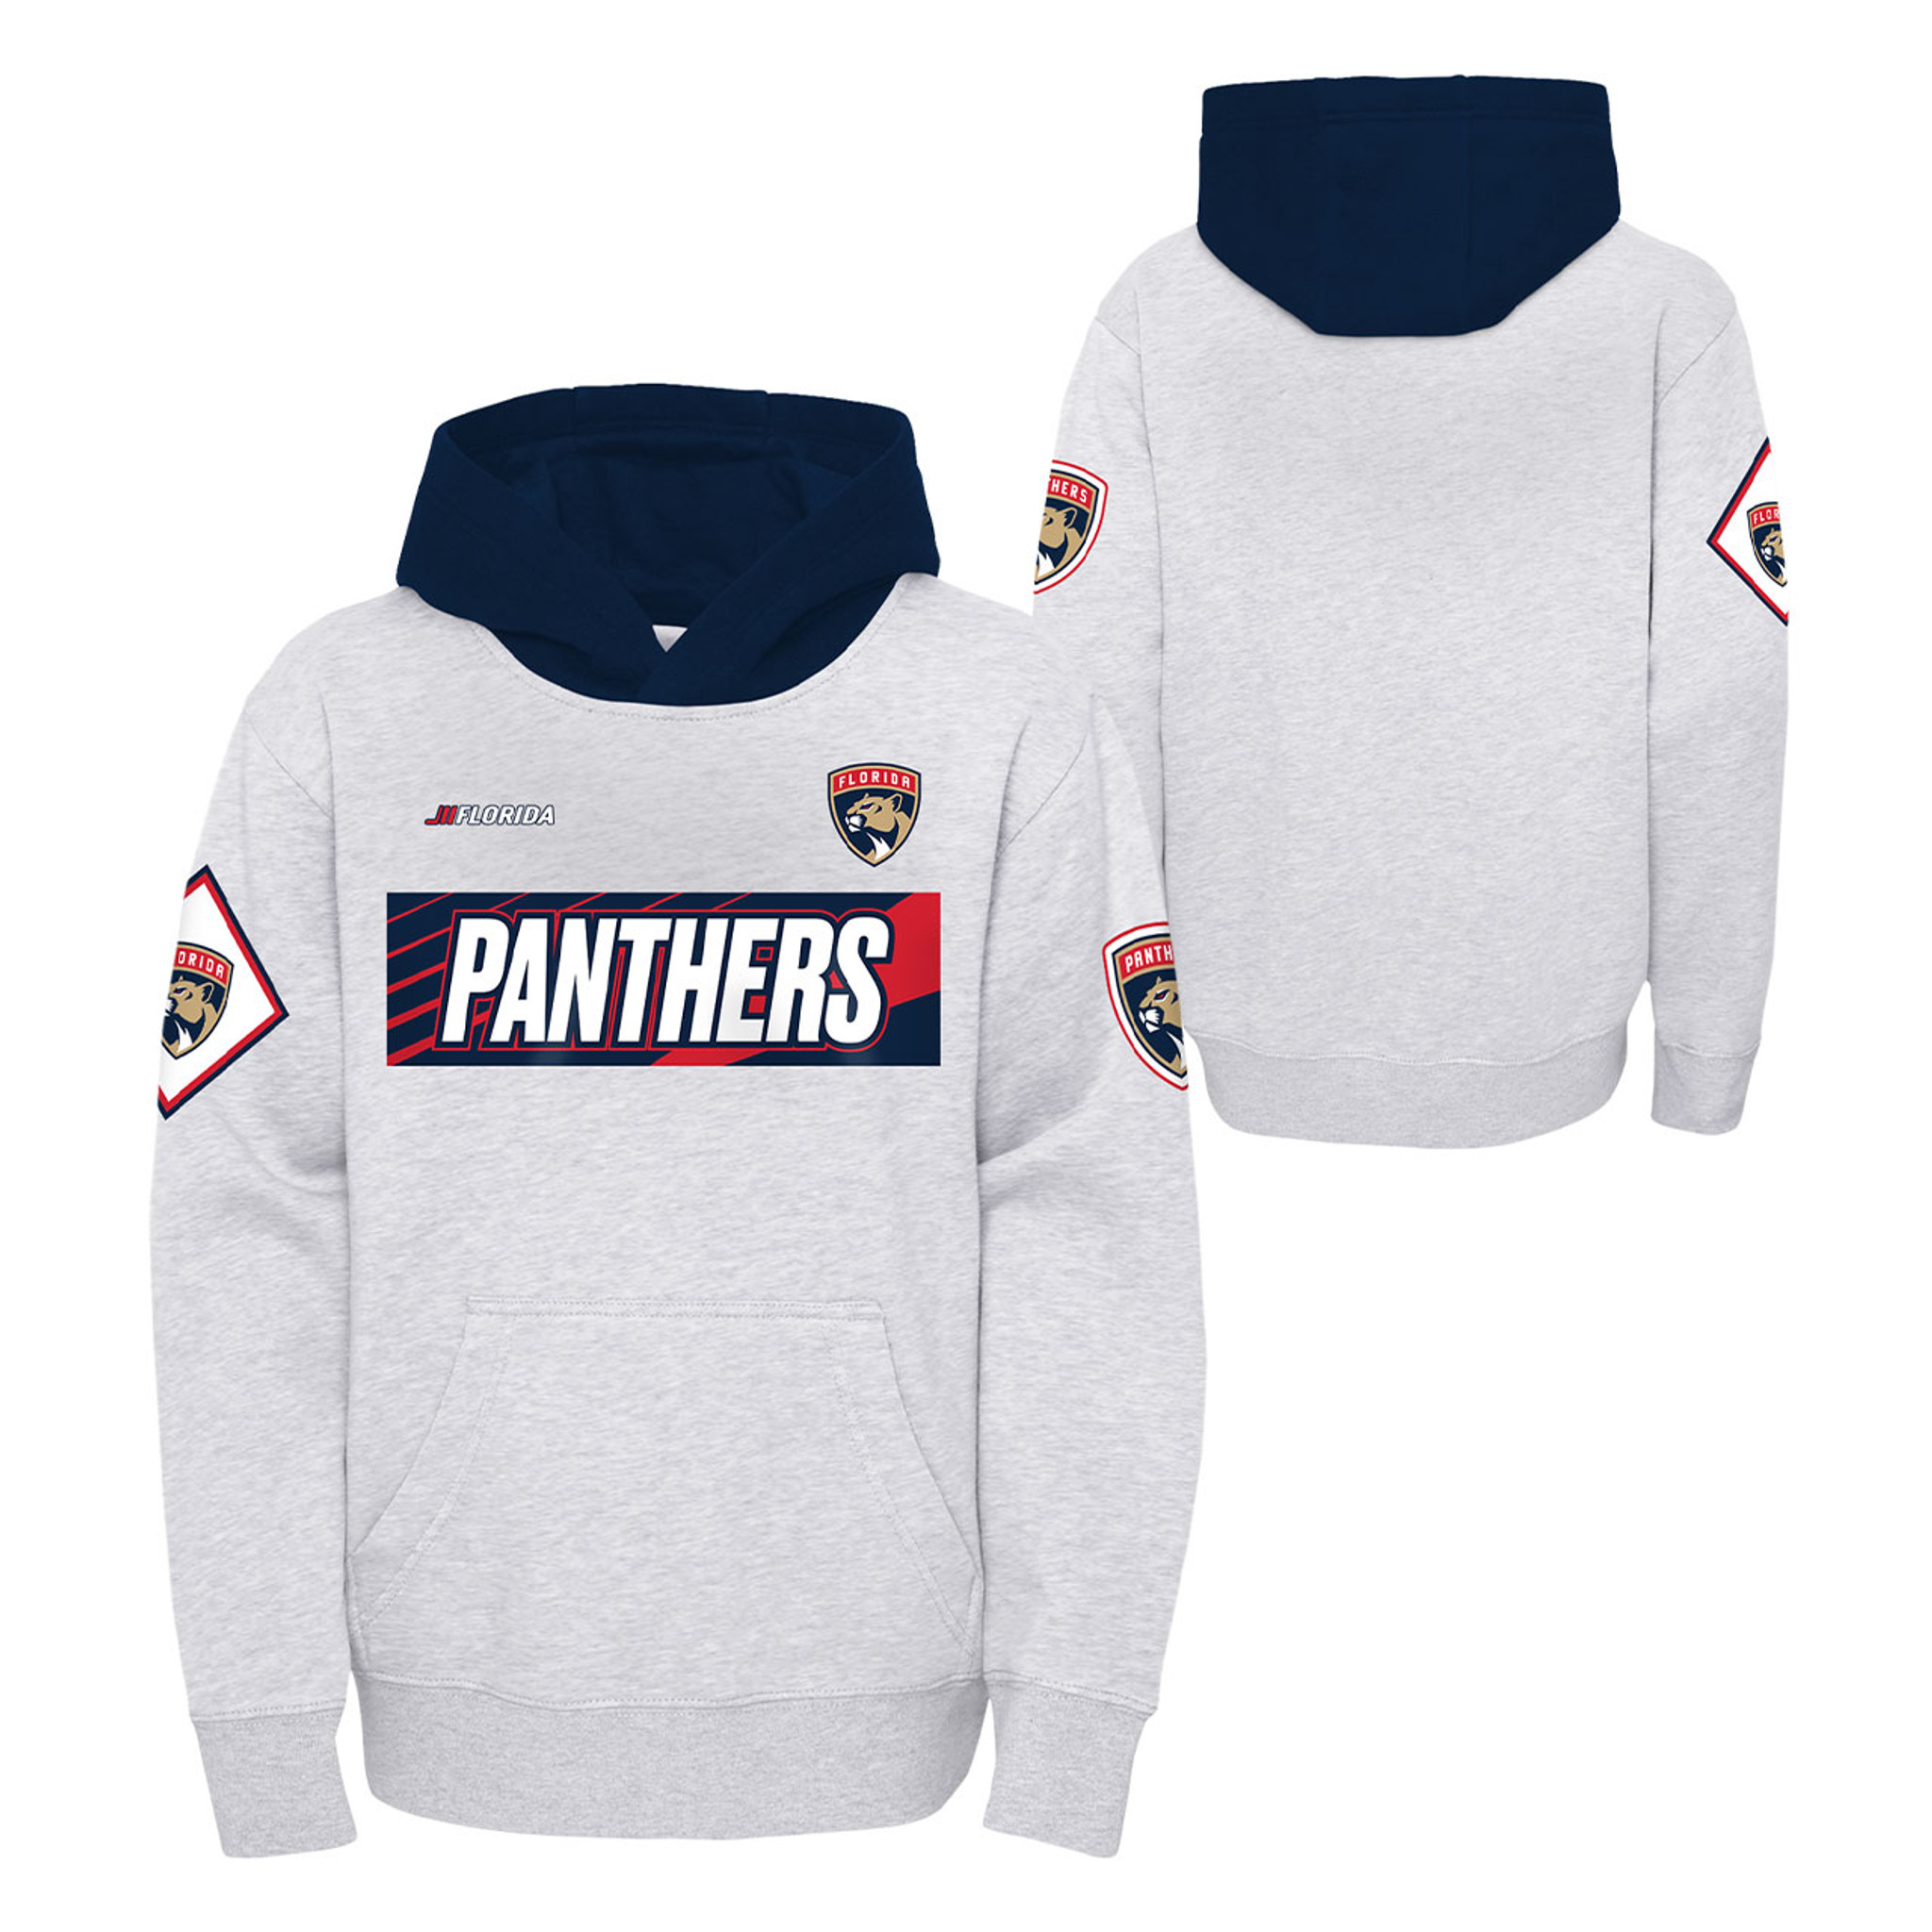 Outerstuff Shutout Long Sleeve Tee - Florida Panthers - Youth